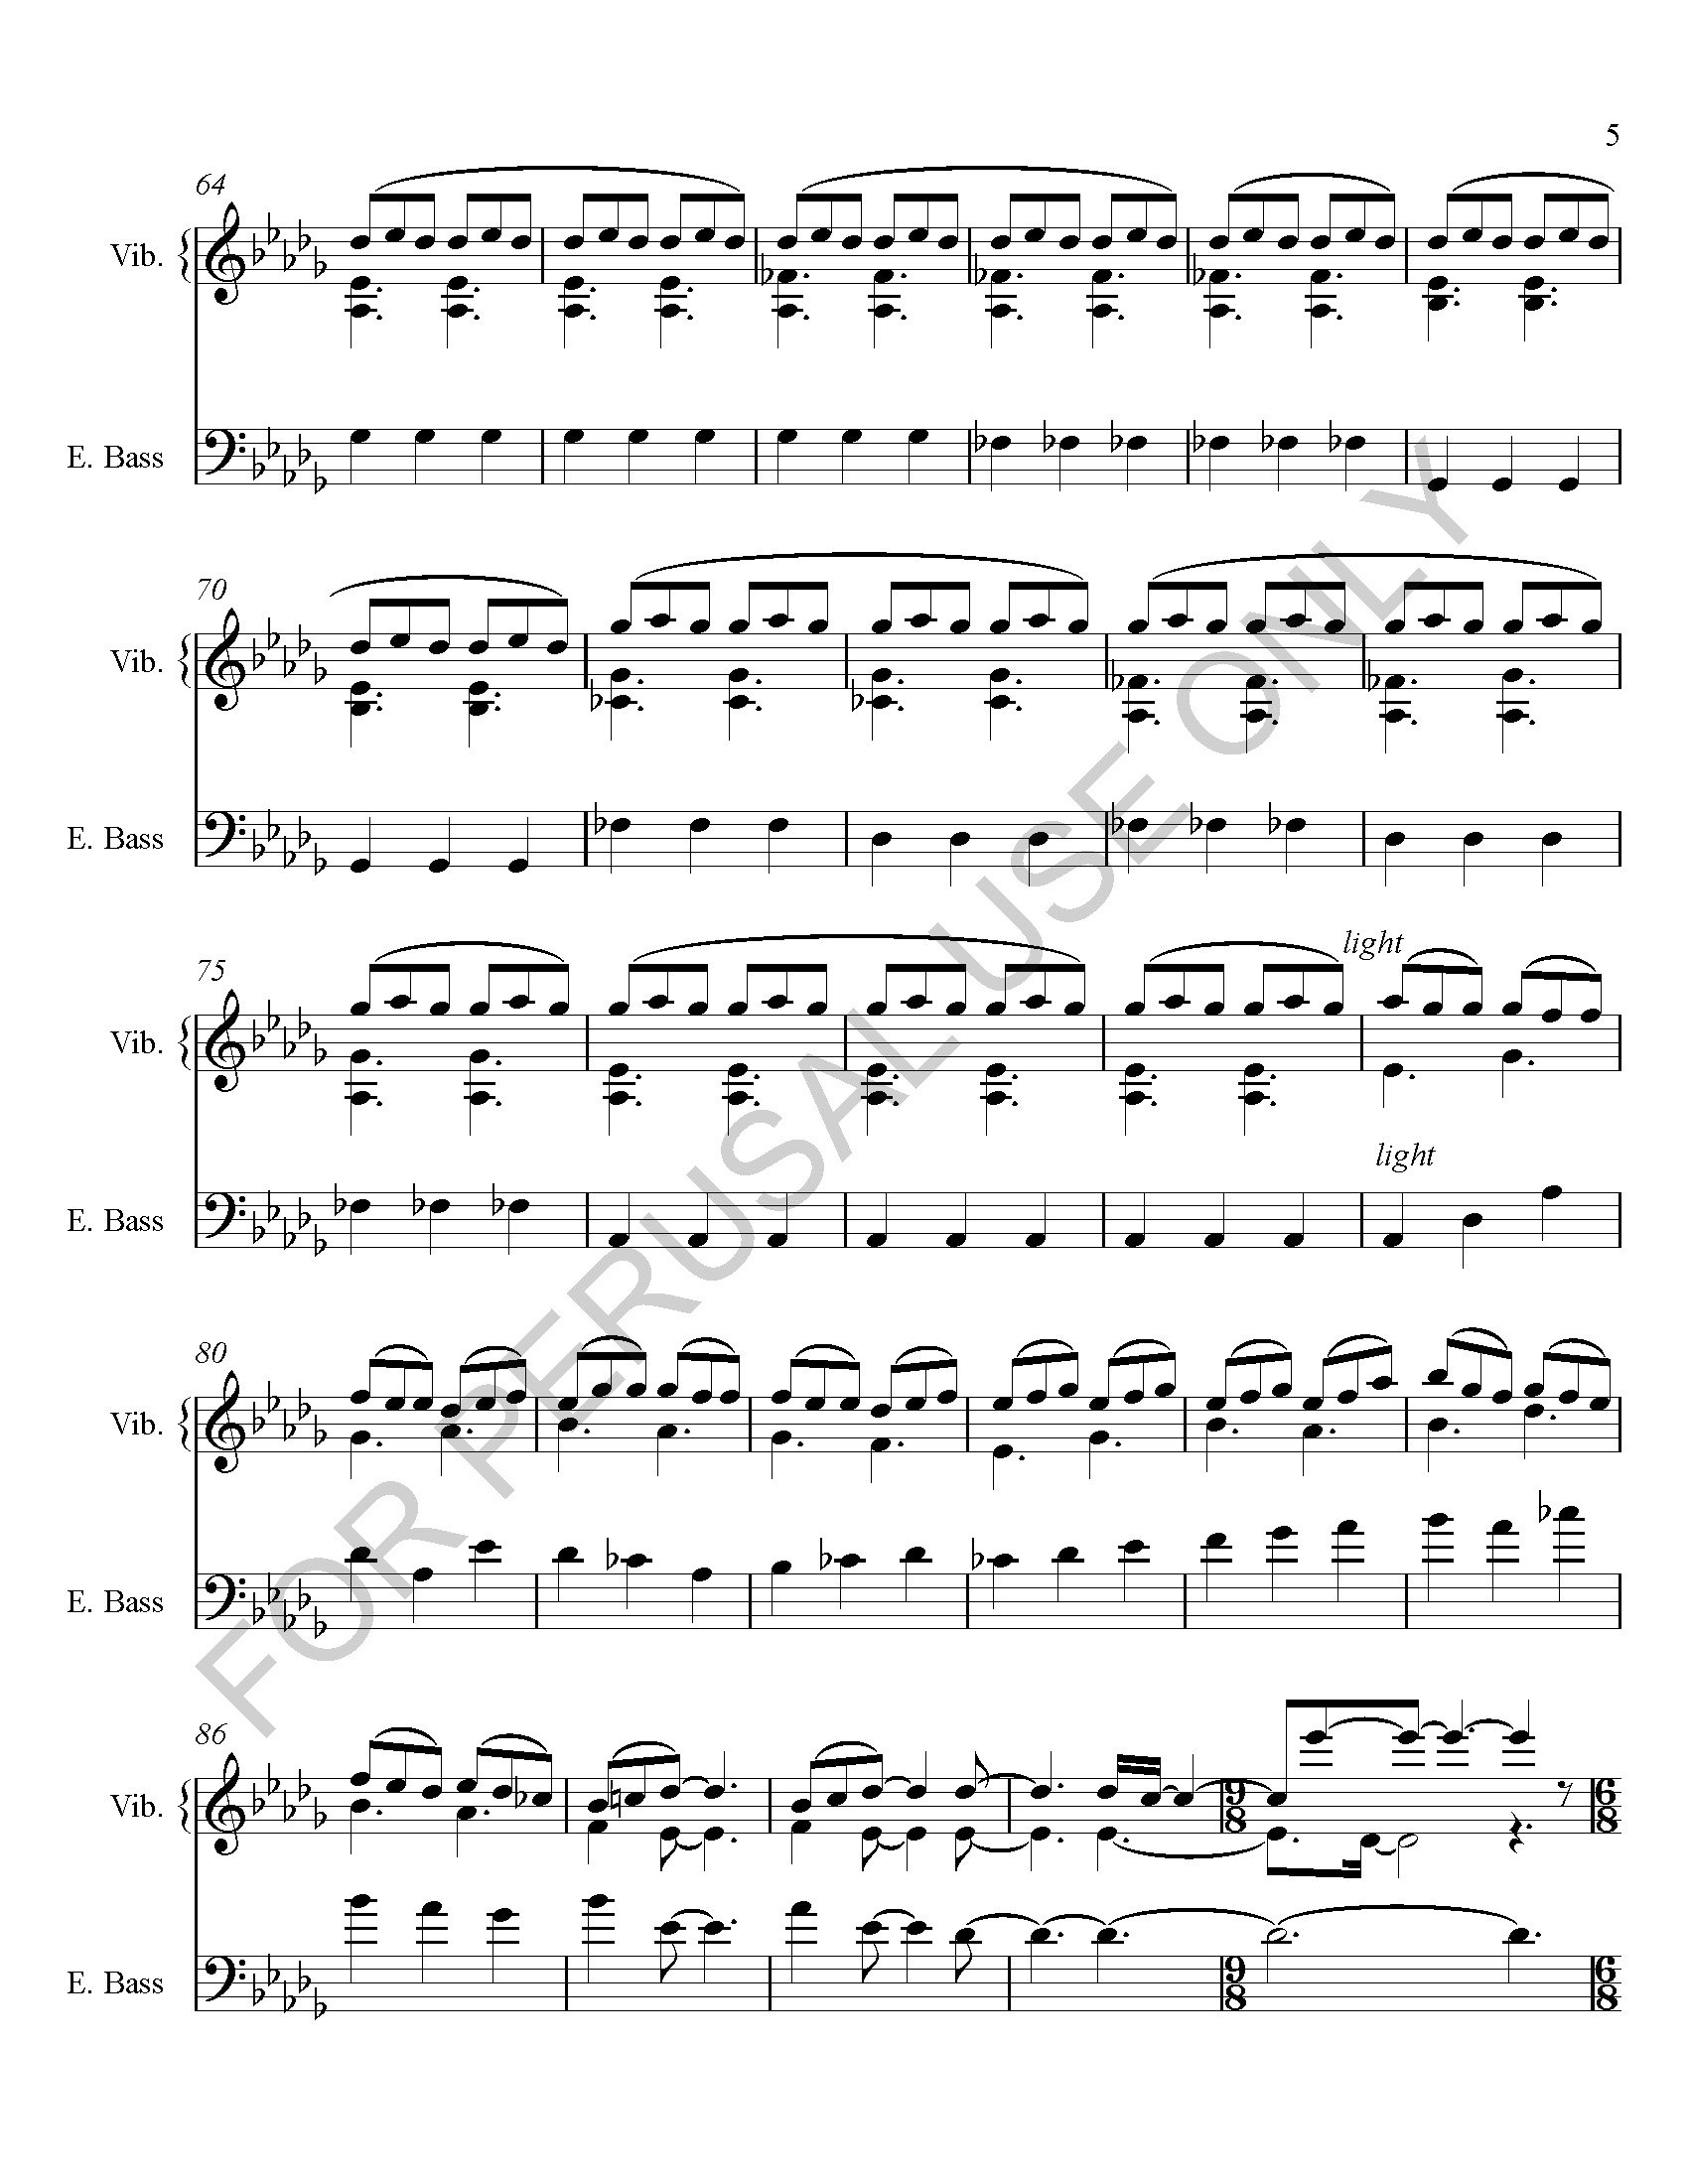 RANKIN - THE NUMBER OF THE SIRENS AS TWO - PERFORMANCE SCORE_Page_5.jpg